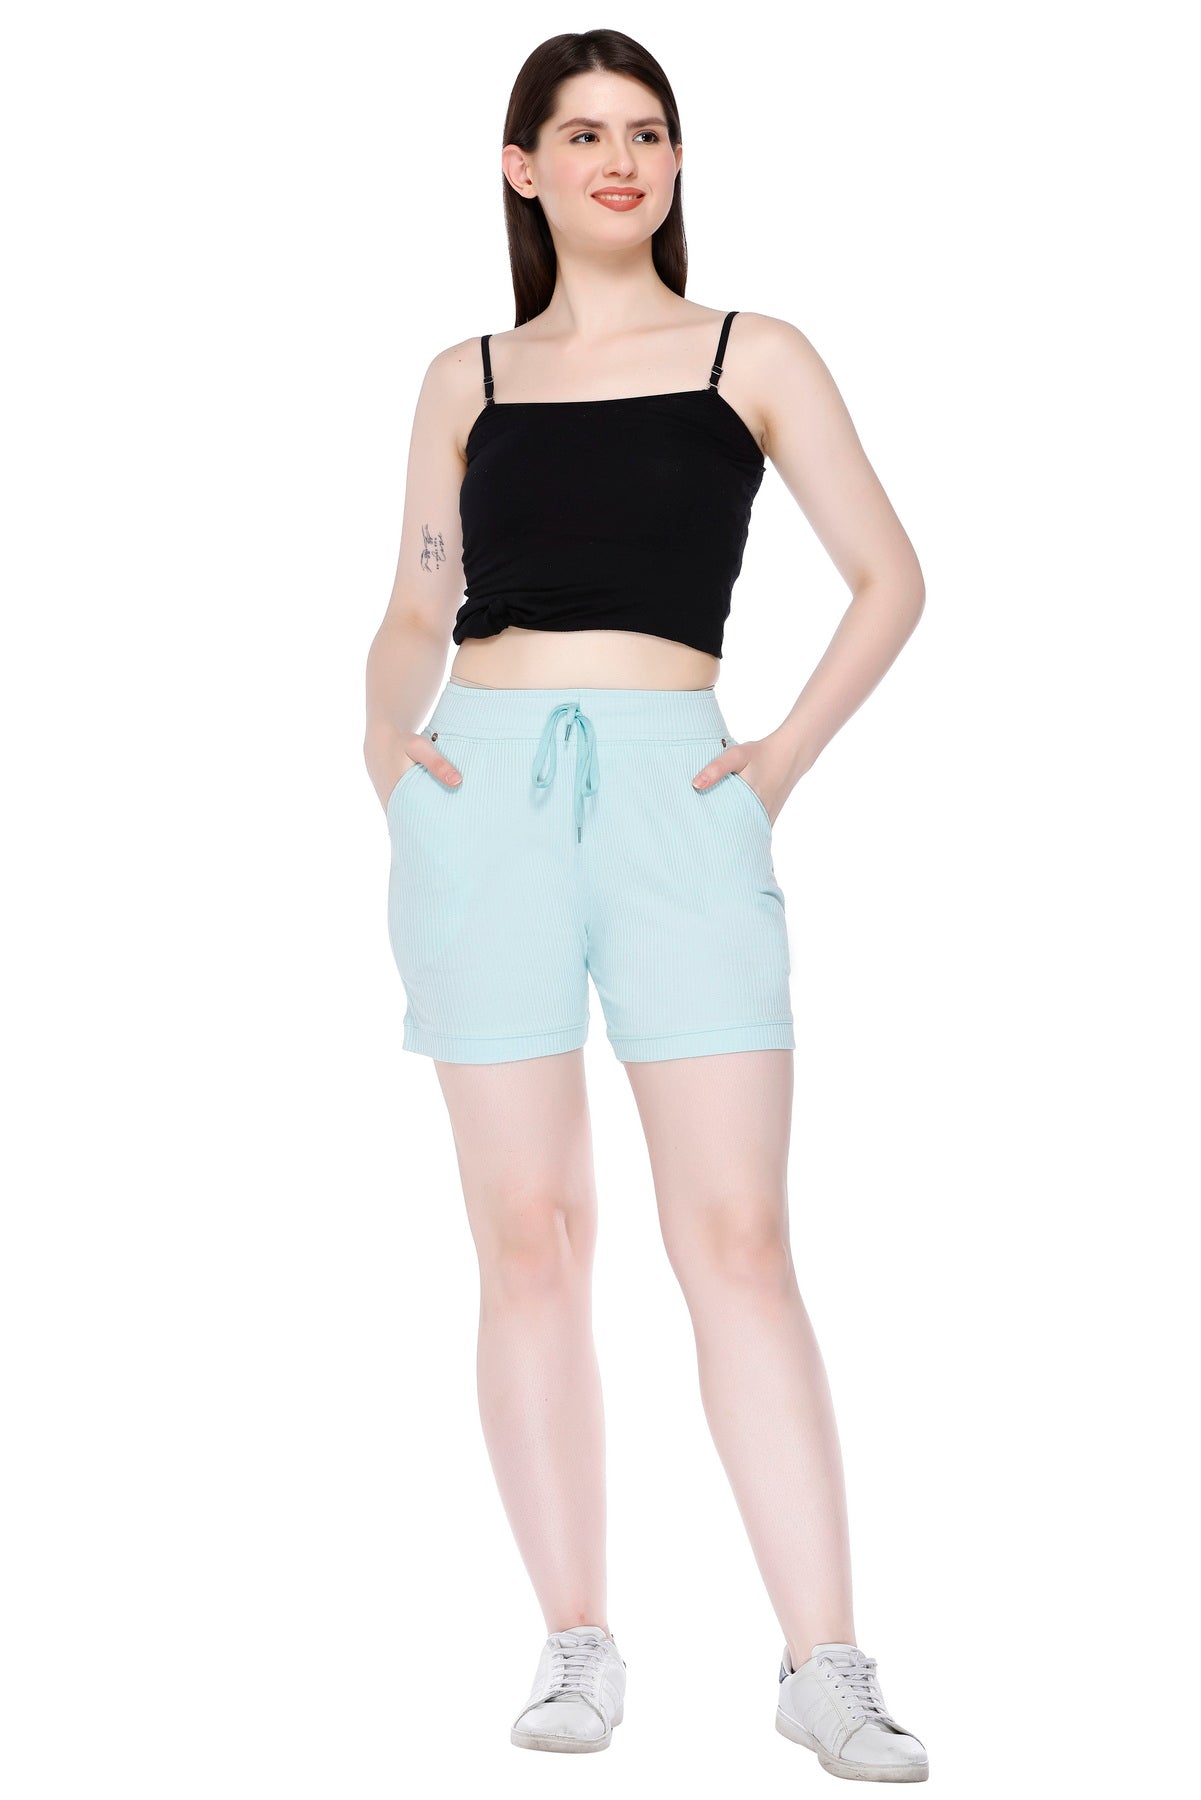 Comfortable Cotton Shorts For Women Combo (Black & Mint) Online In India